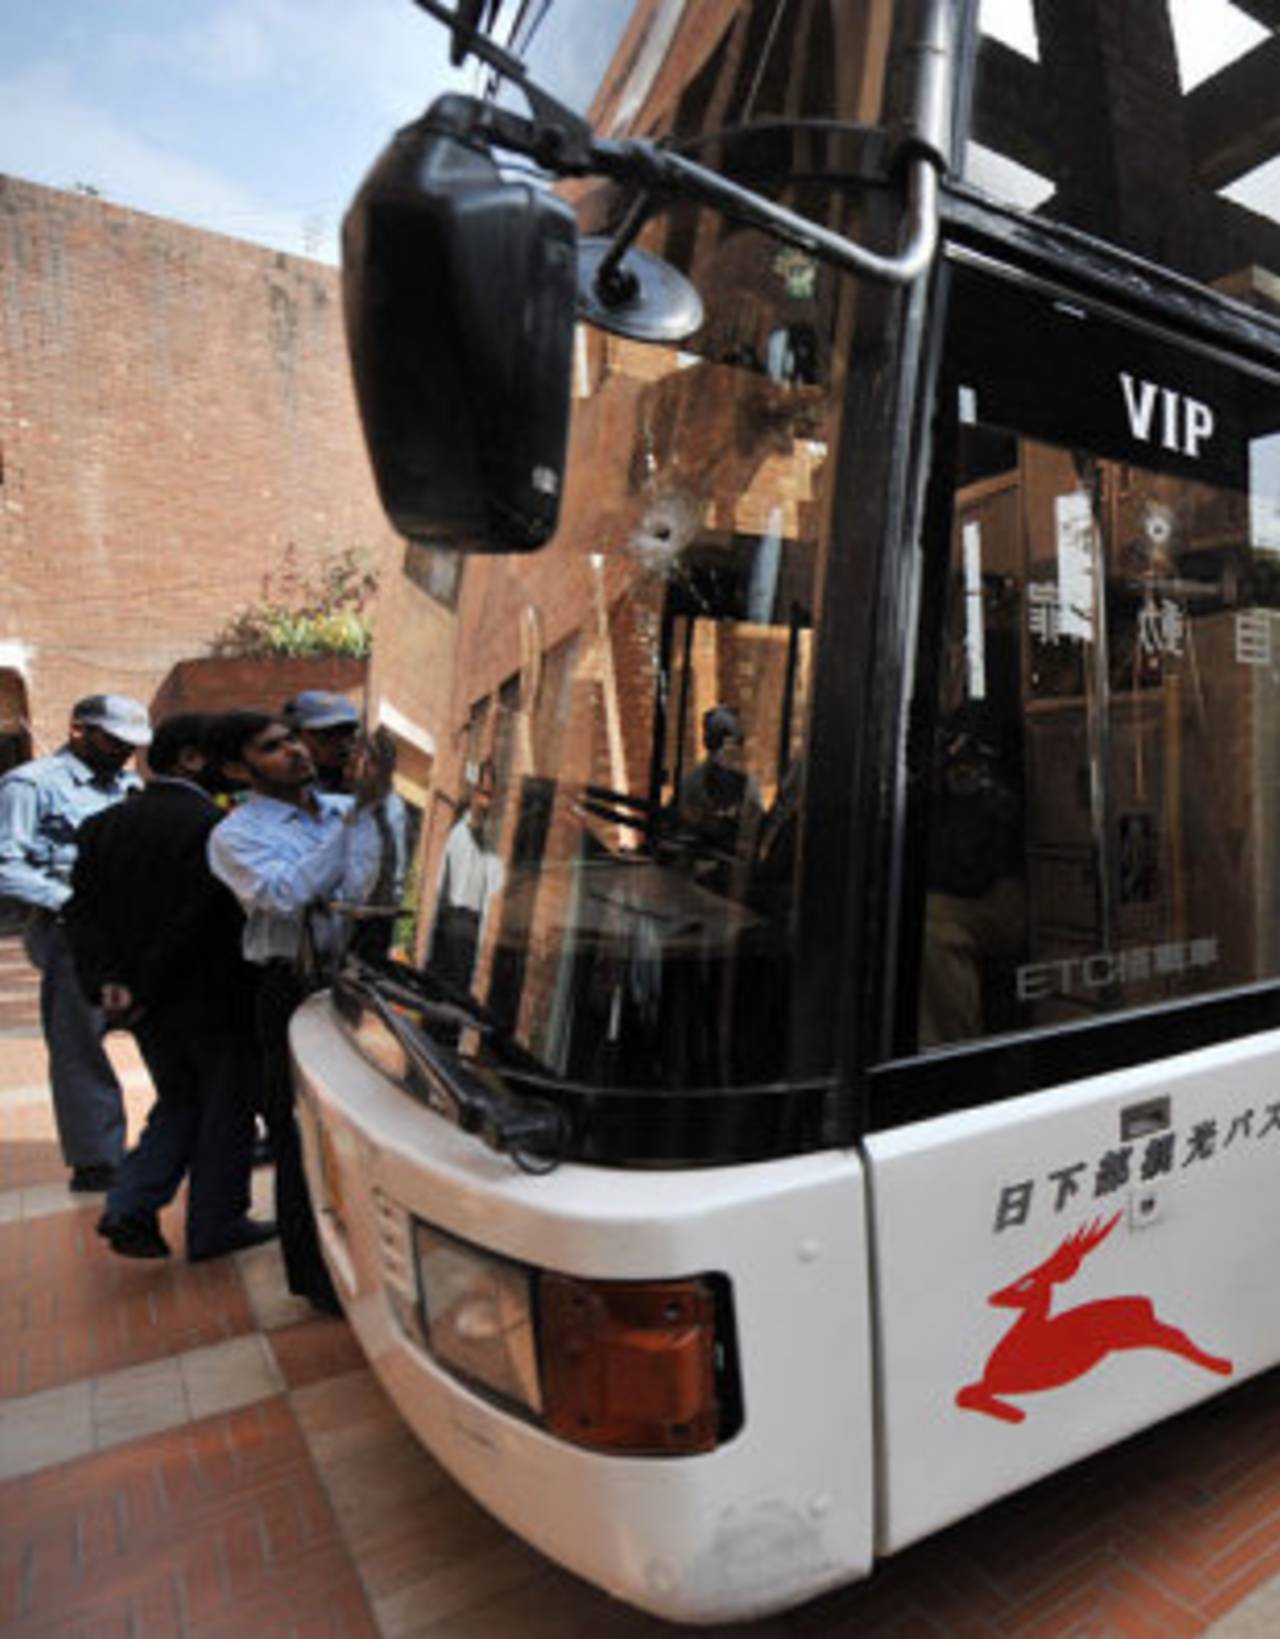 Security guards crowd round the Sri Lankan team's bullet-ridden bus, Lahore, March 3, 2009